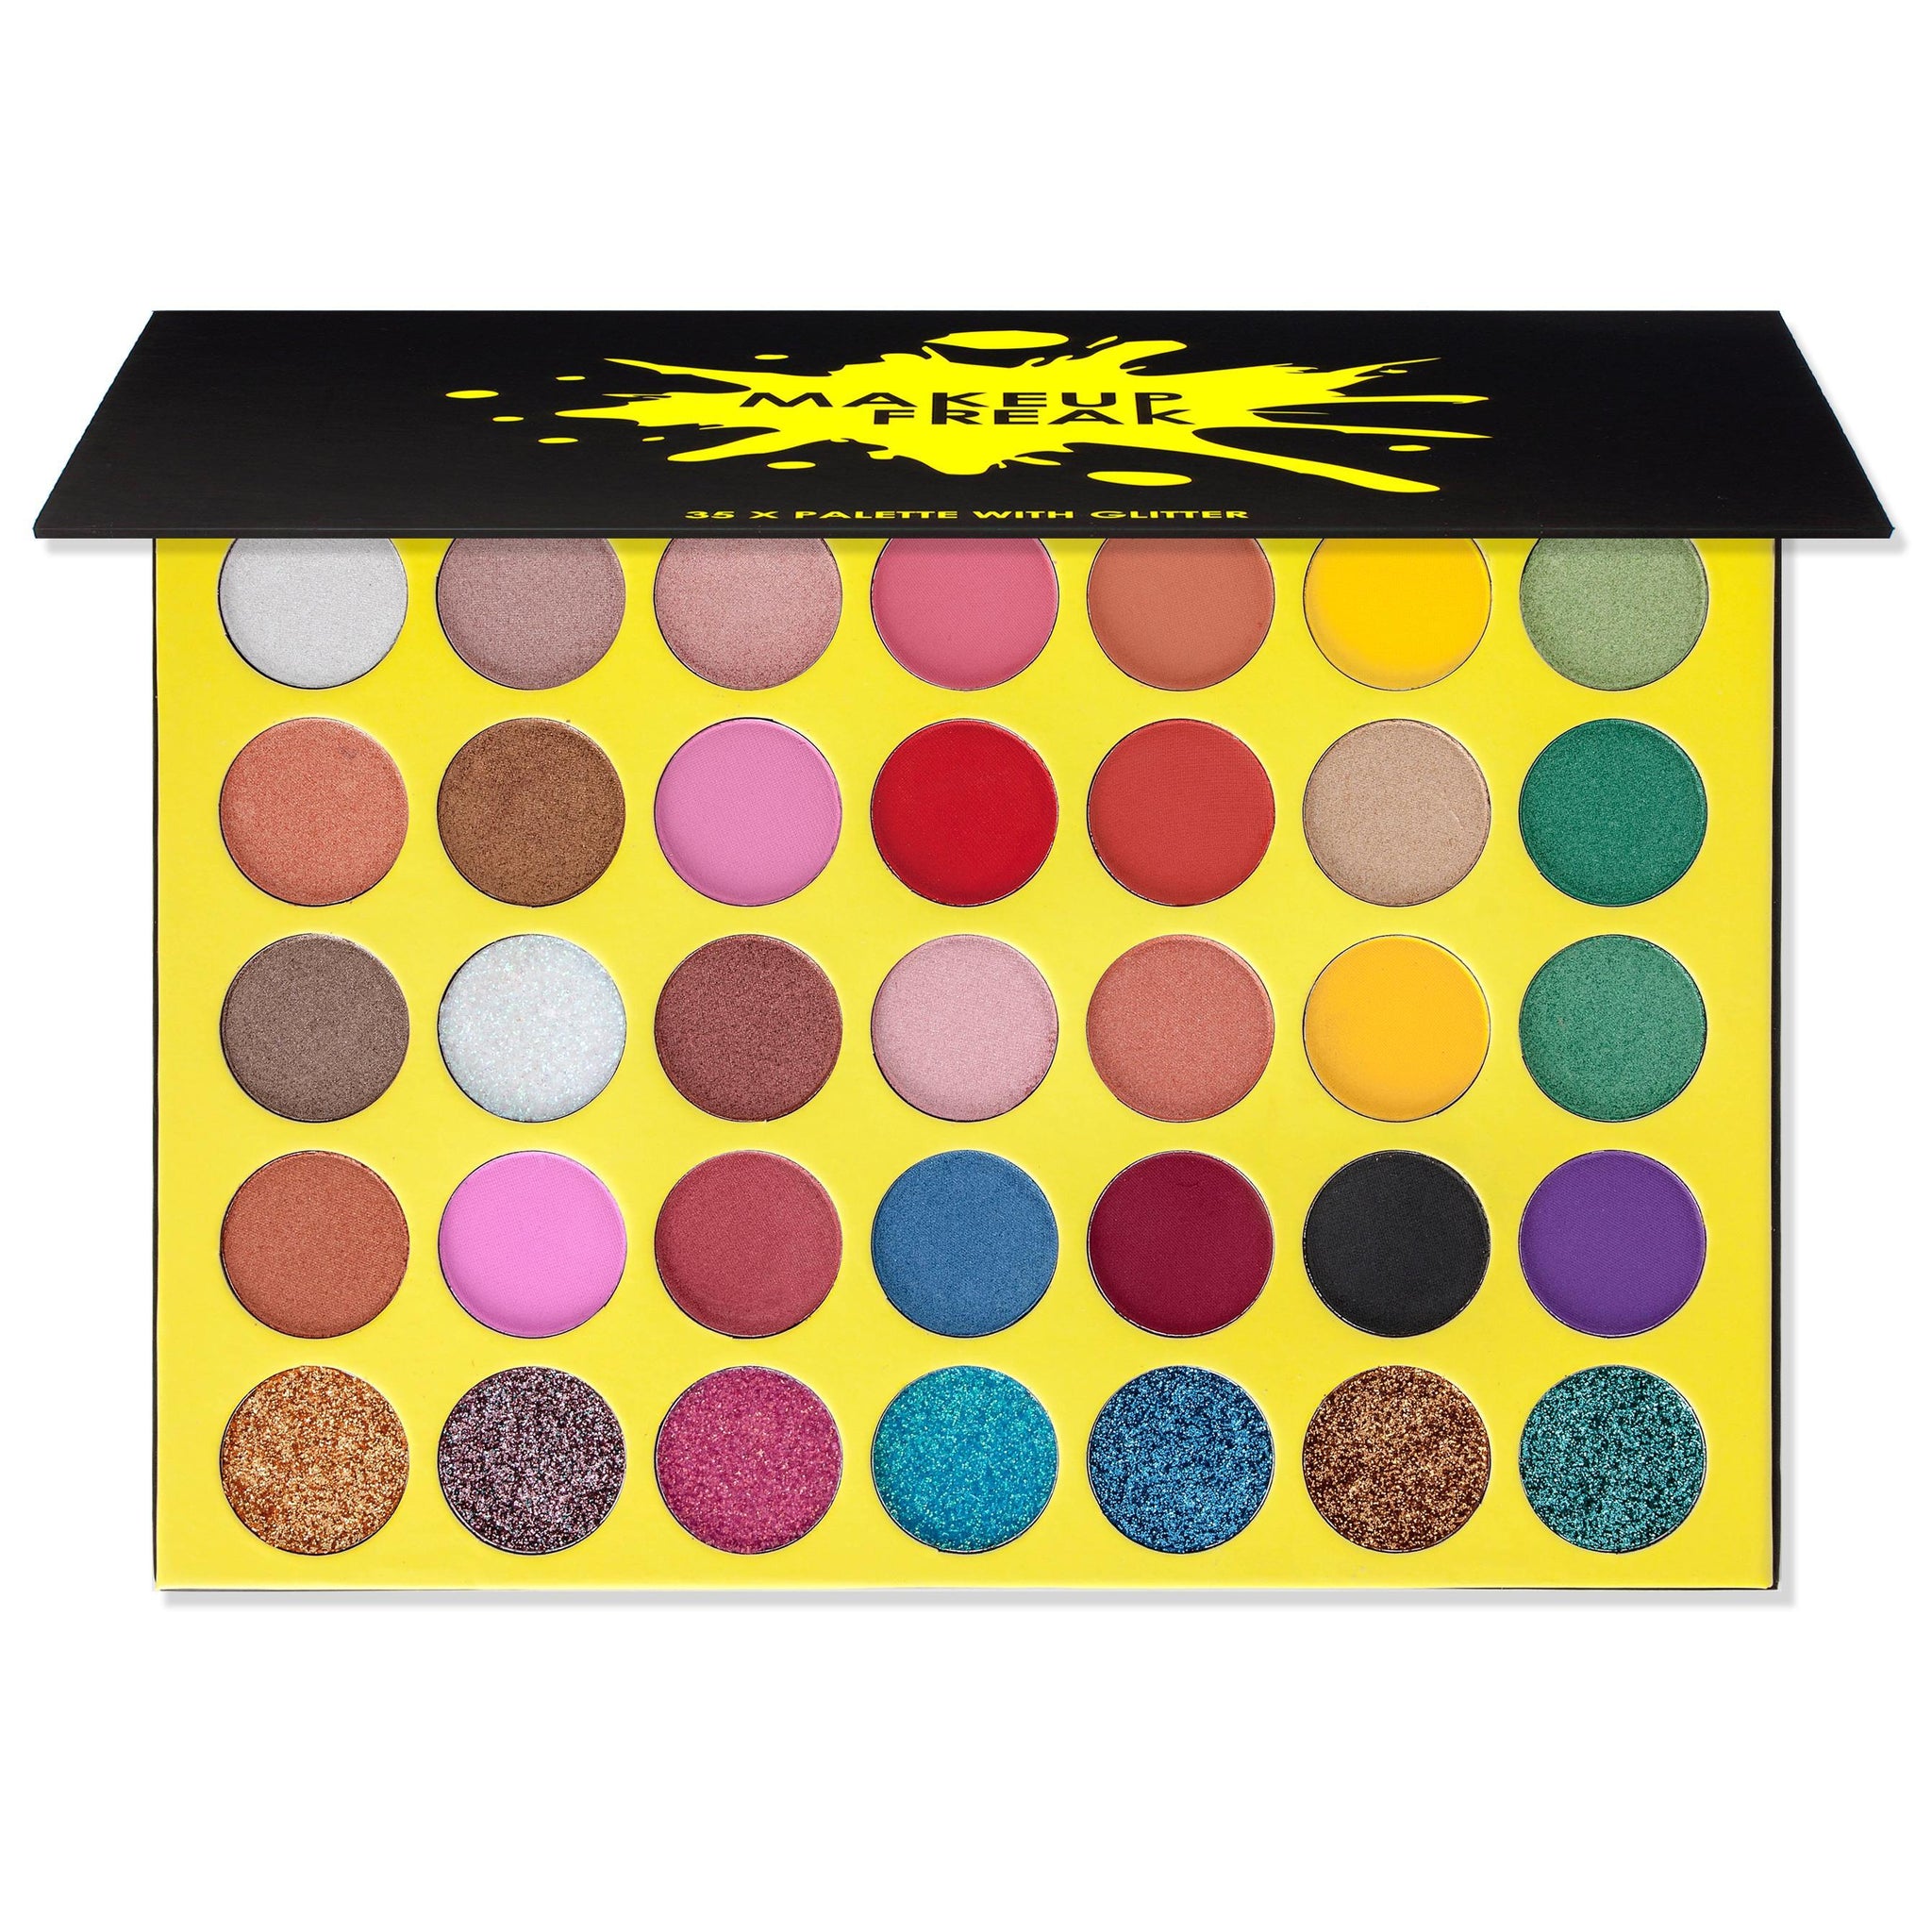 Makeup Freak HOLIDAY 35 Color Pigmented Eyeshadow Palette Plus 7 Glitter Shades Holiday Palette